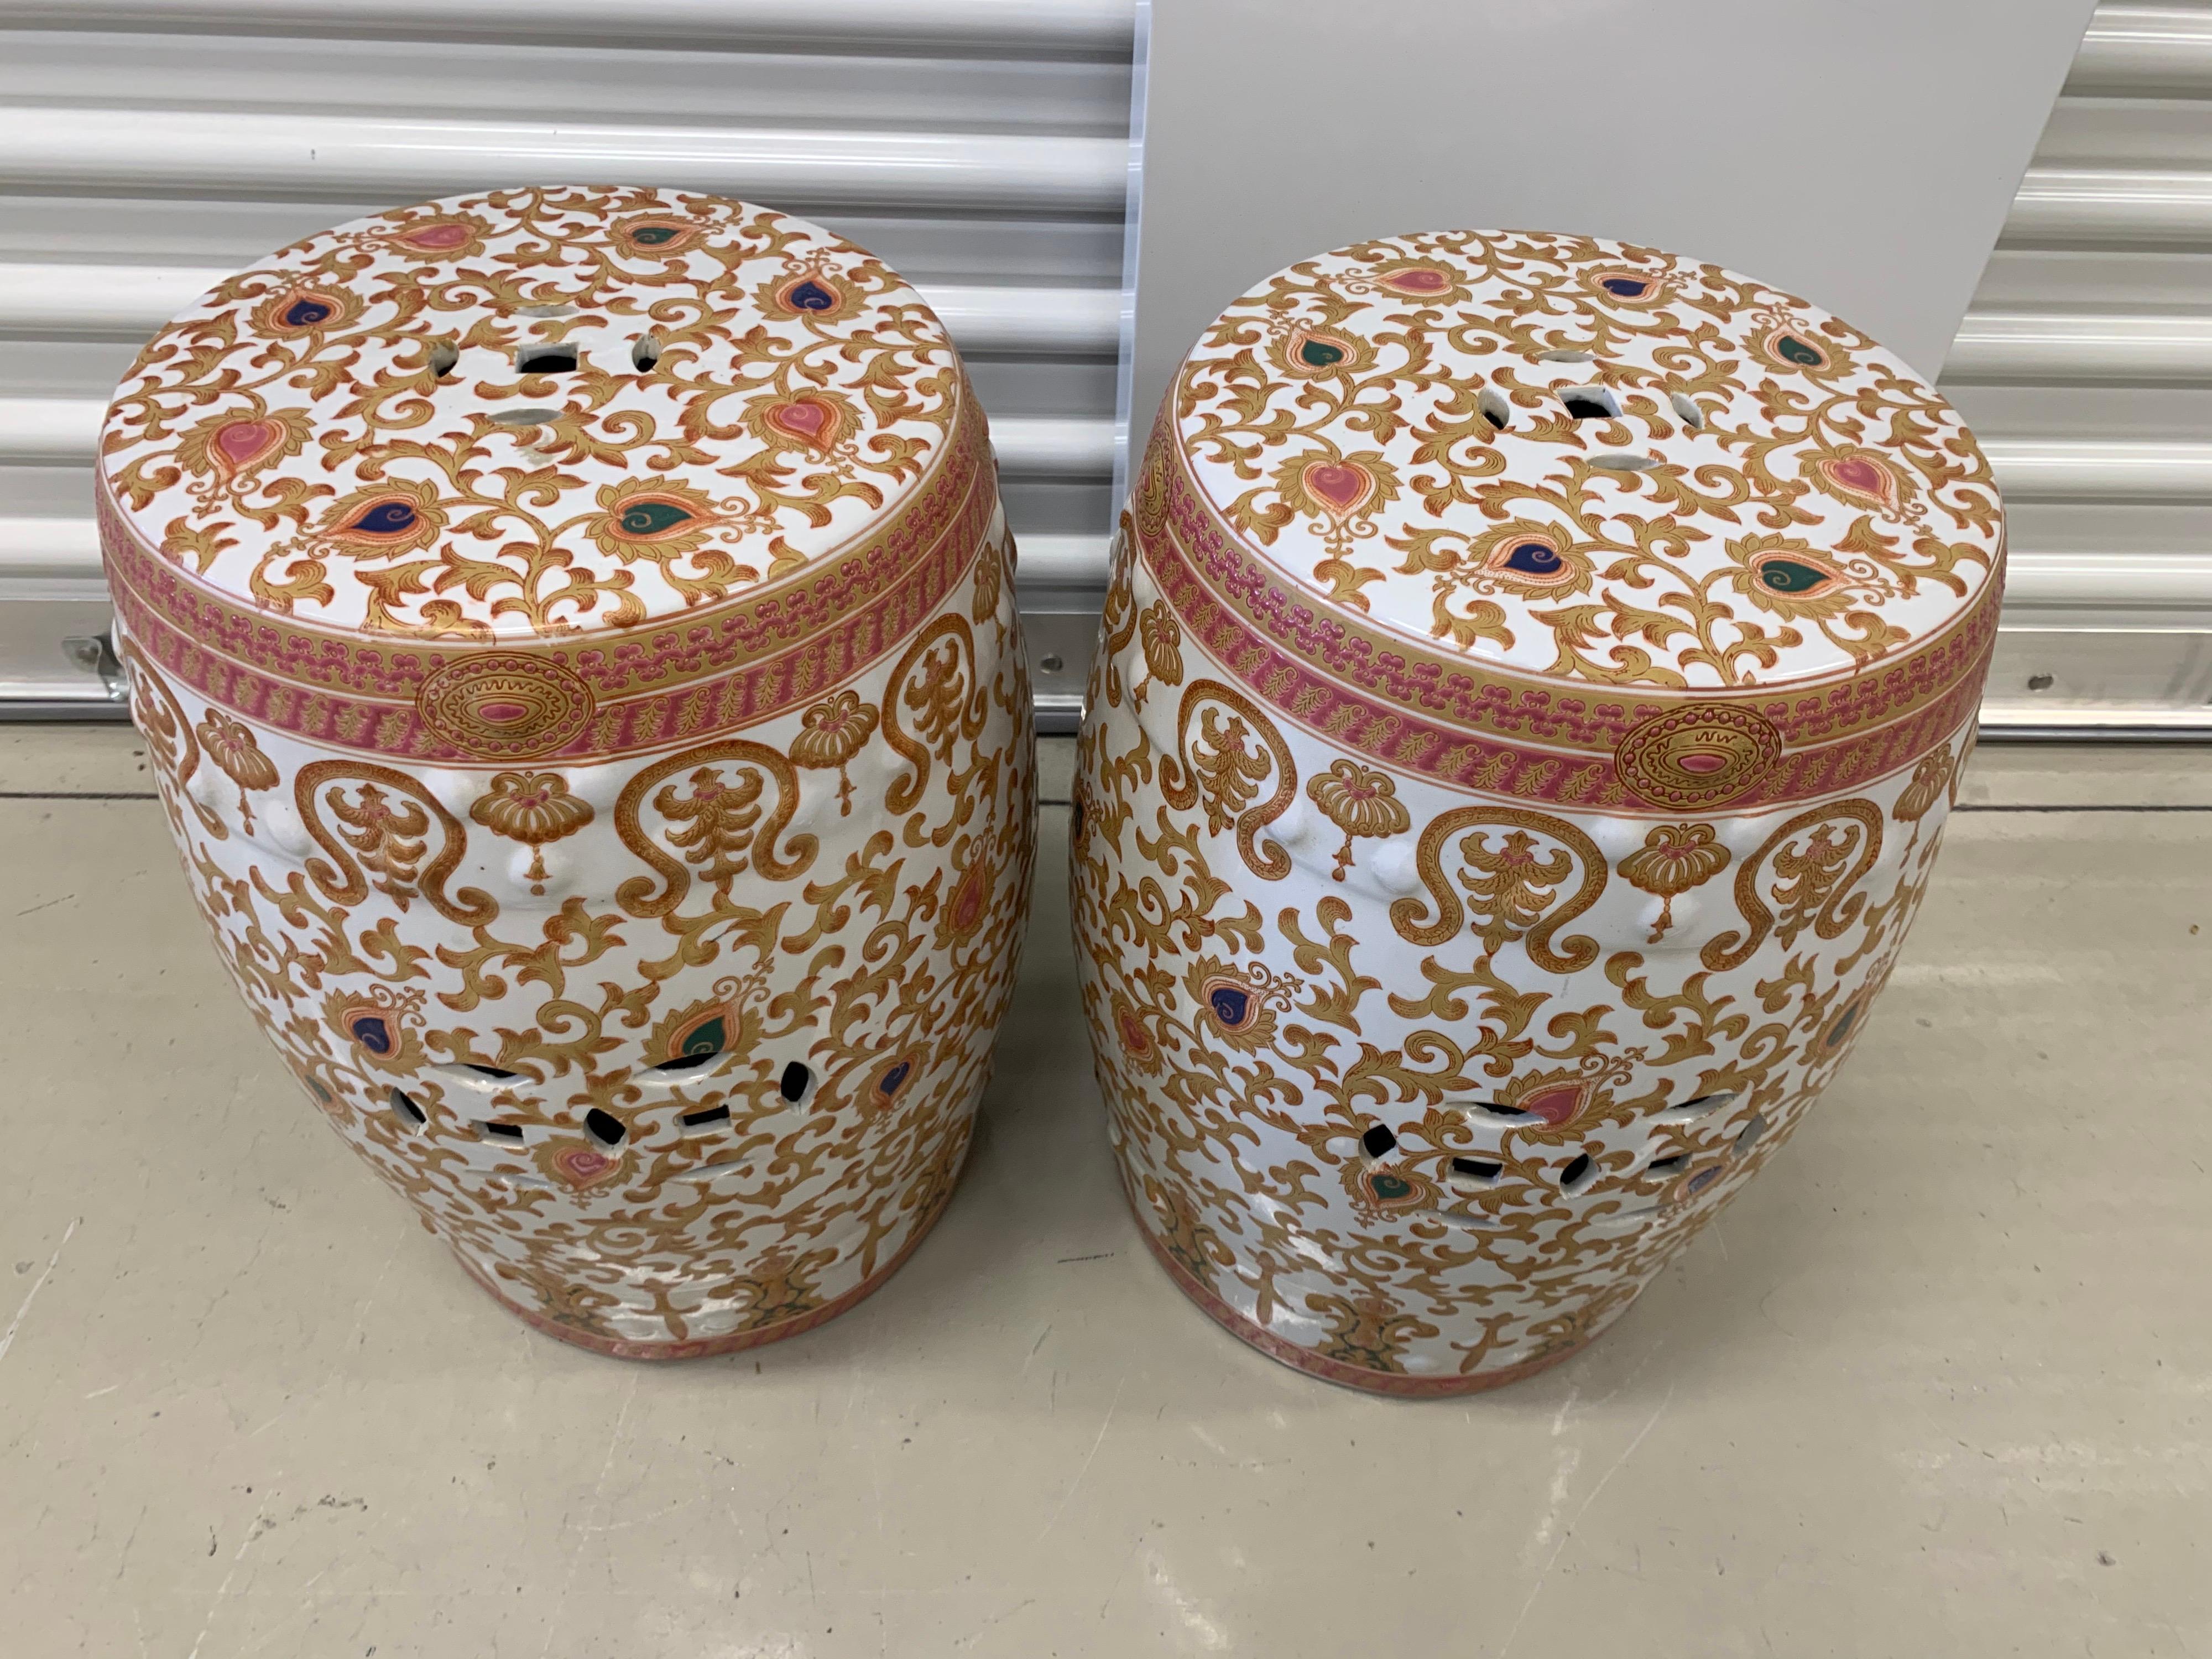 Matching pair of persimmon, white and gold vintage Asian garden stools. Great scale and color scheme.
 